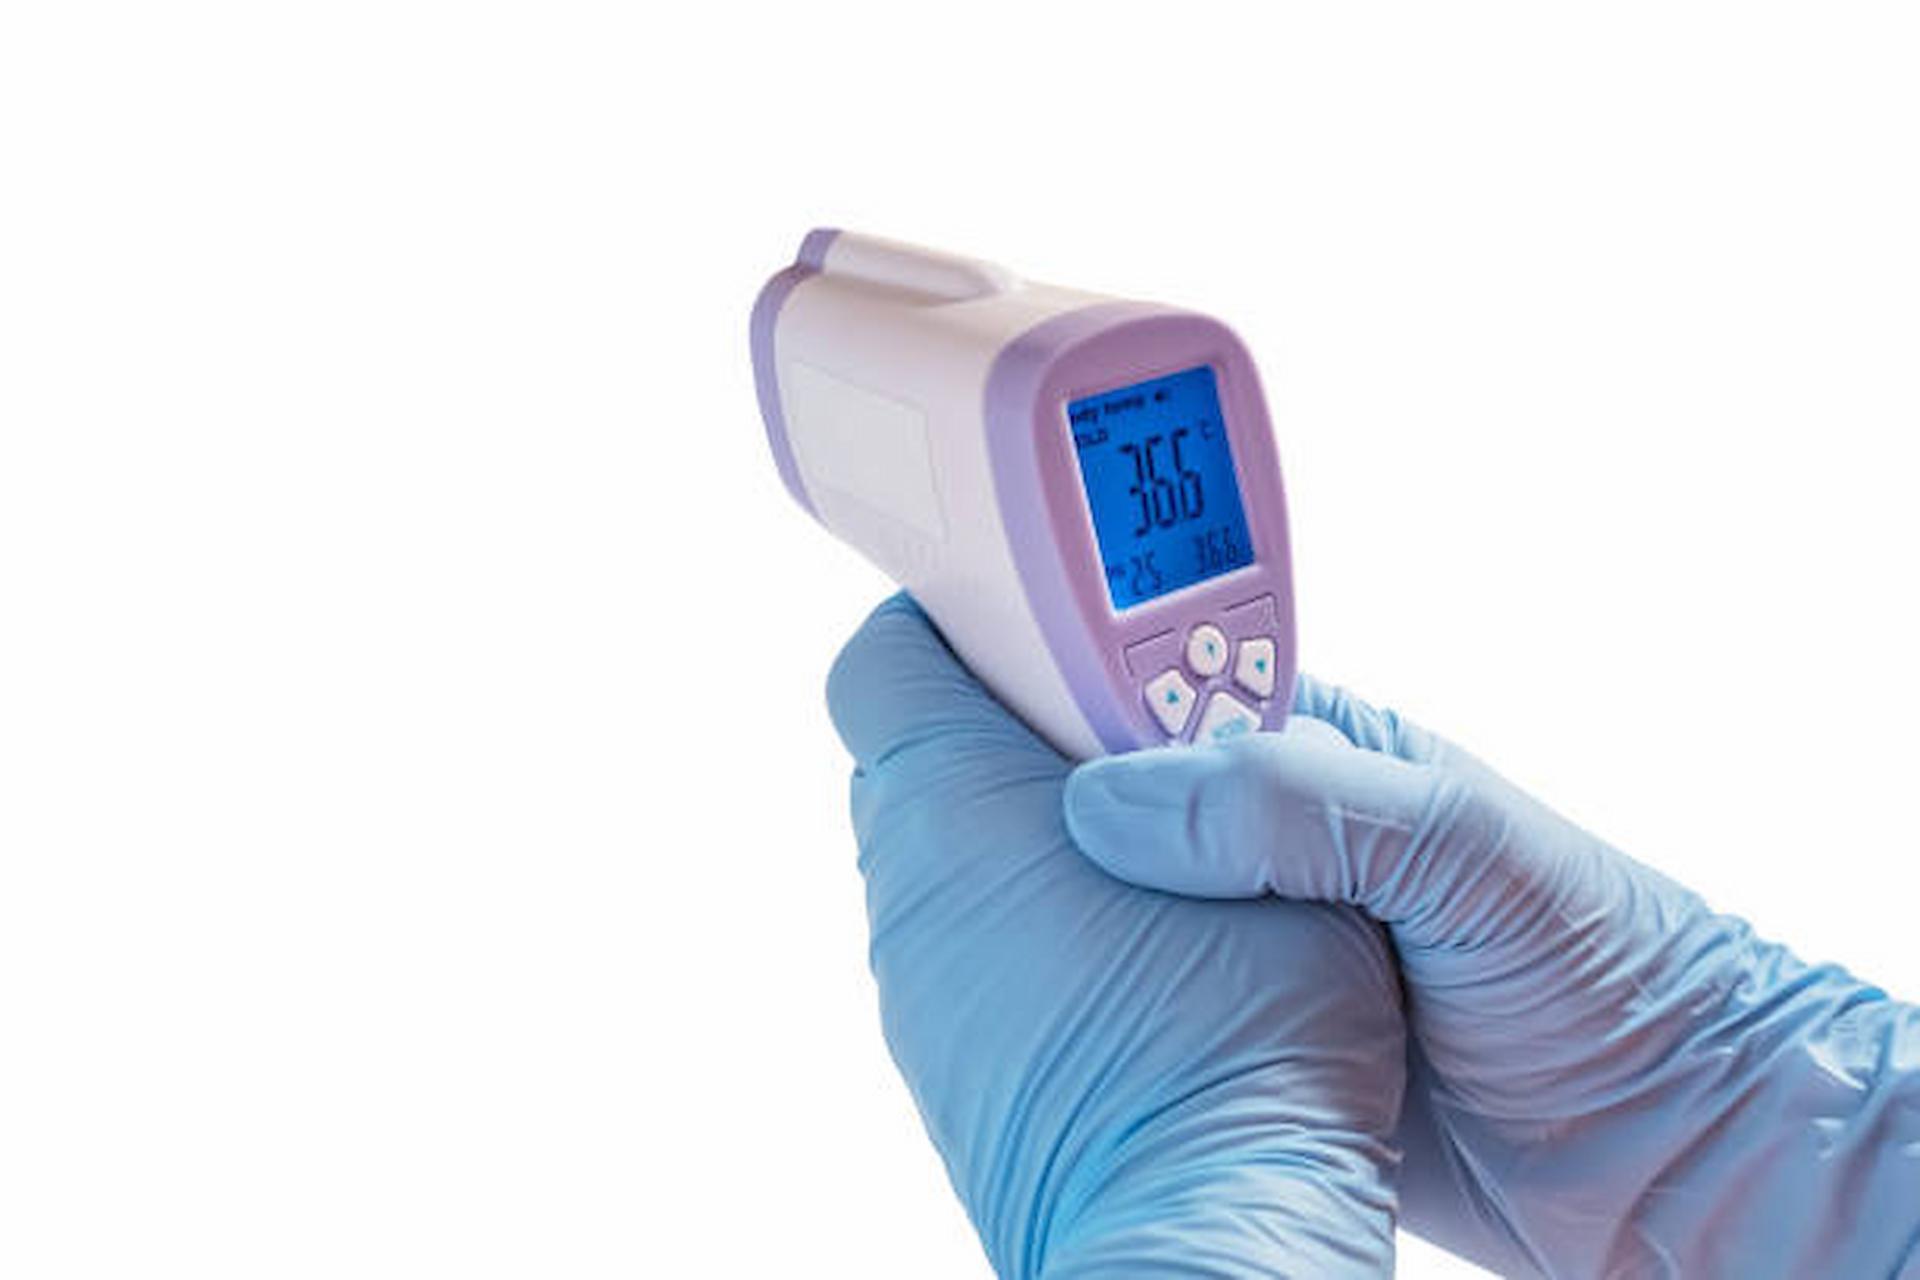 Key Advantages Of Infrared Thermometers That Make Them Popular